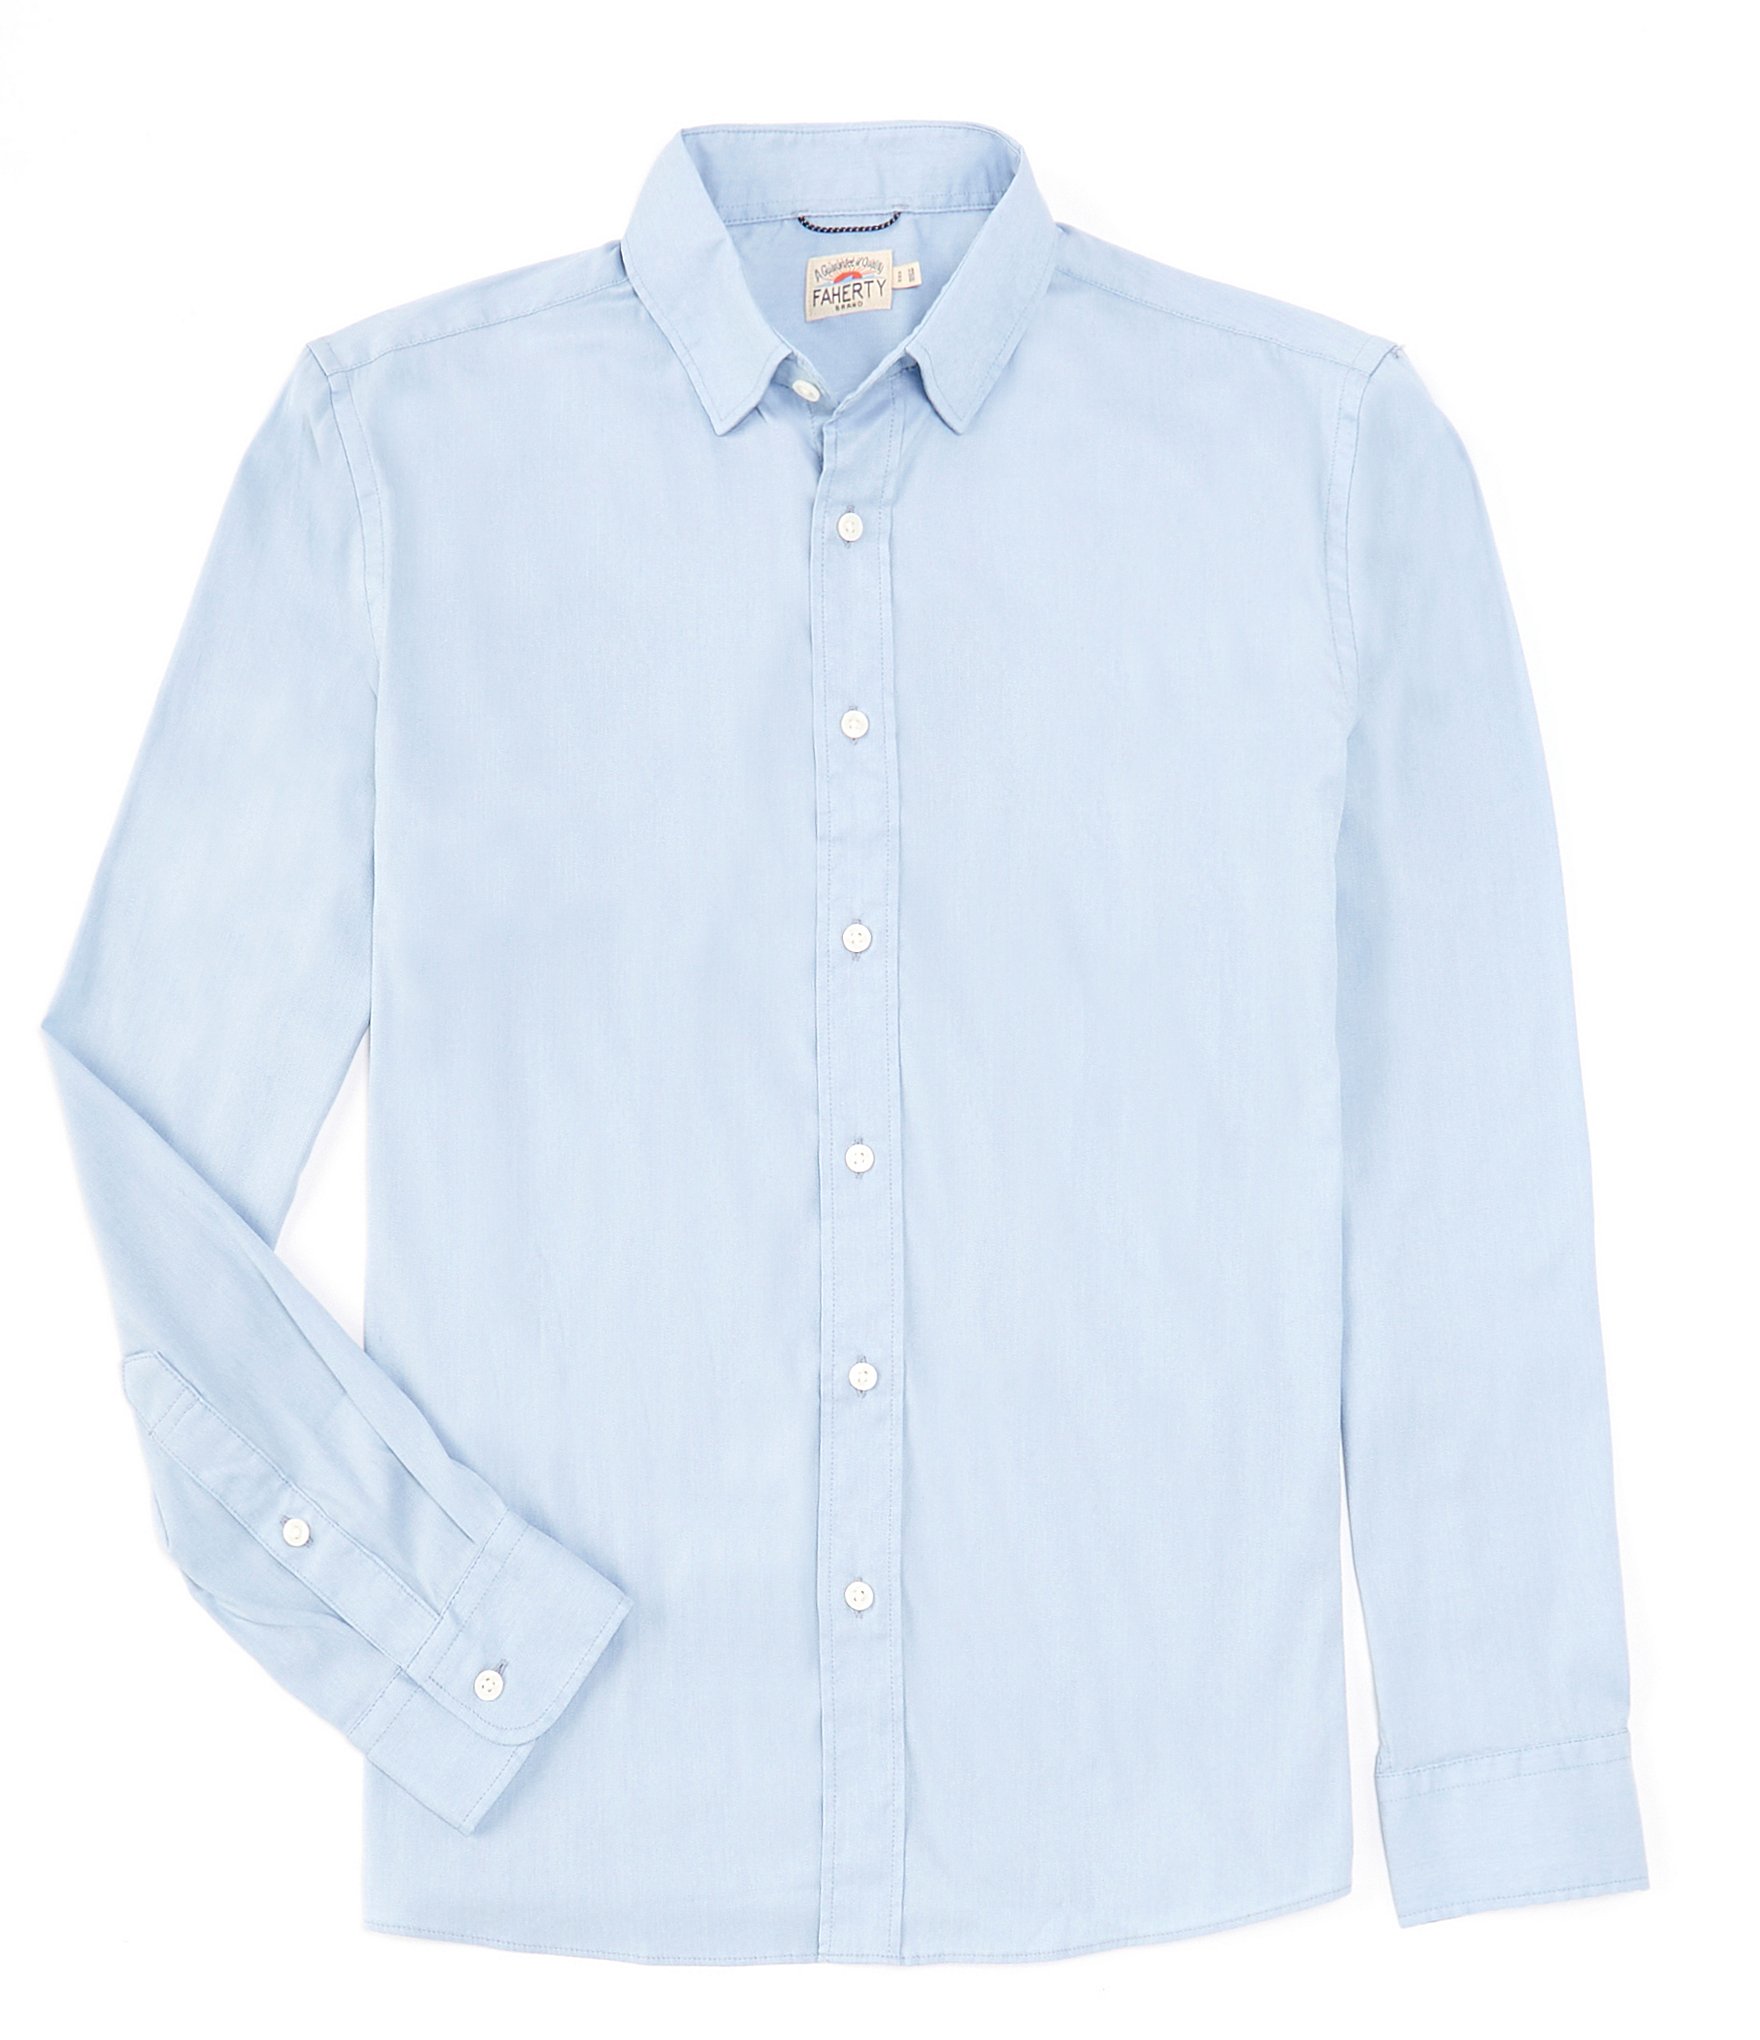 Faherty Performance Stretch Solid Movement Woven Shirt | Dillard's